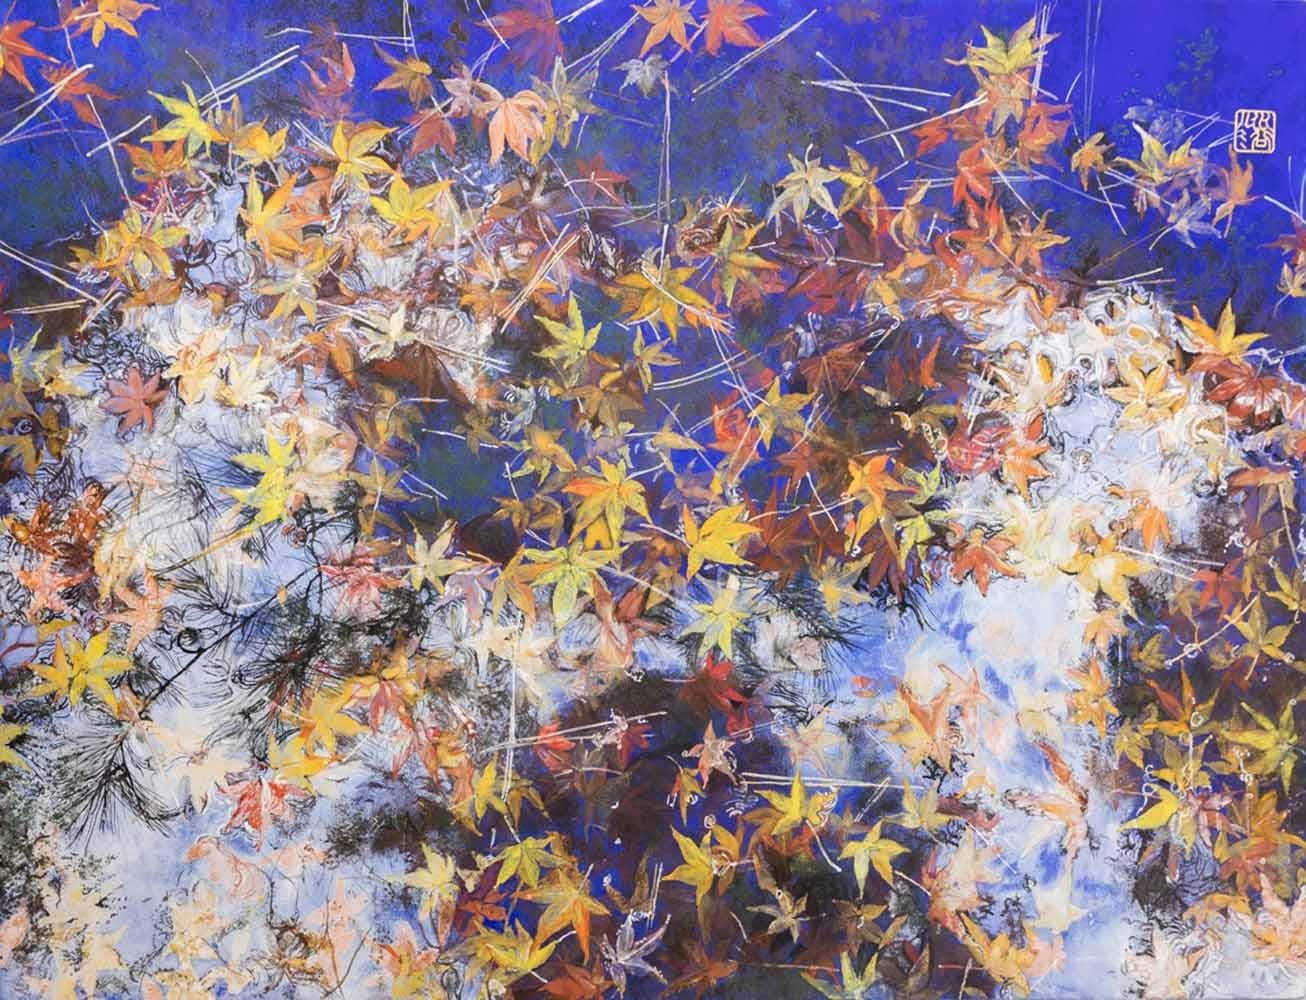 The party’s over III by Lumi Mizutani - Japanese style painting, autumn leaves 